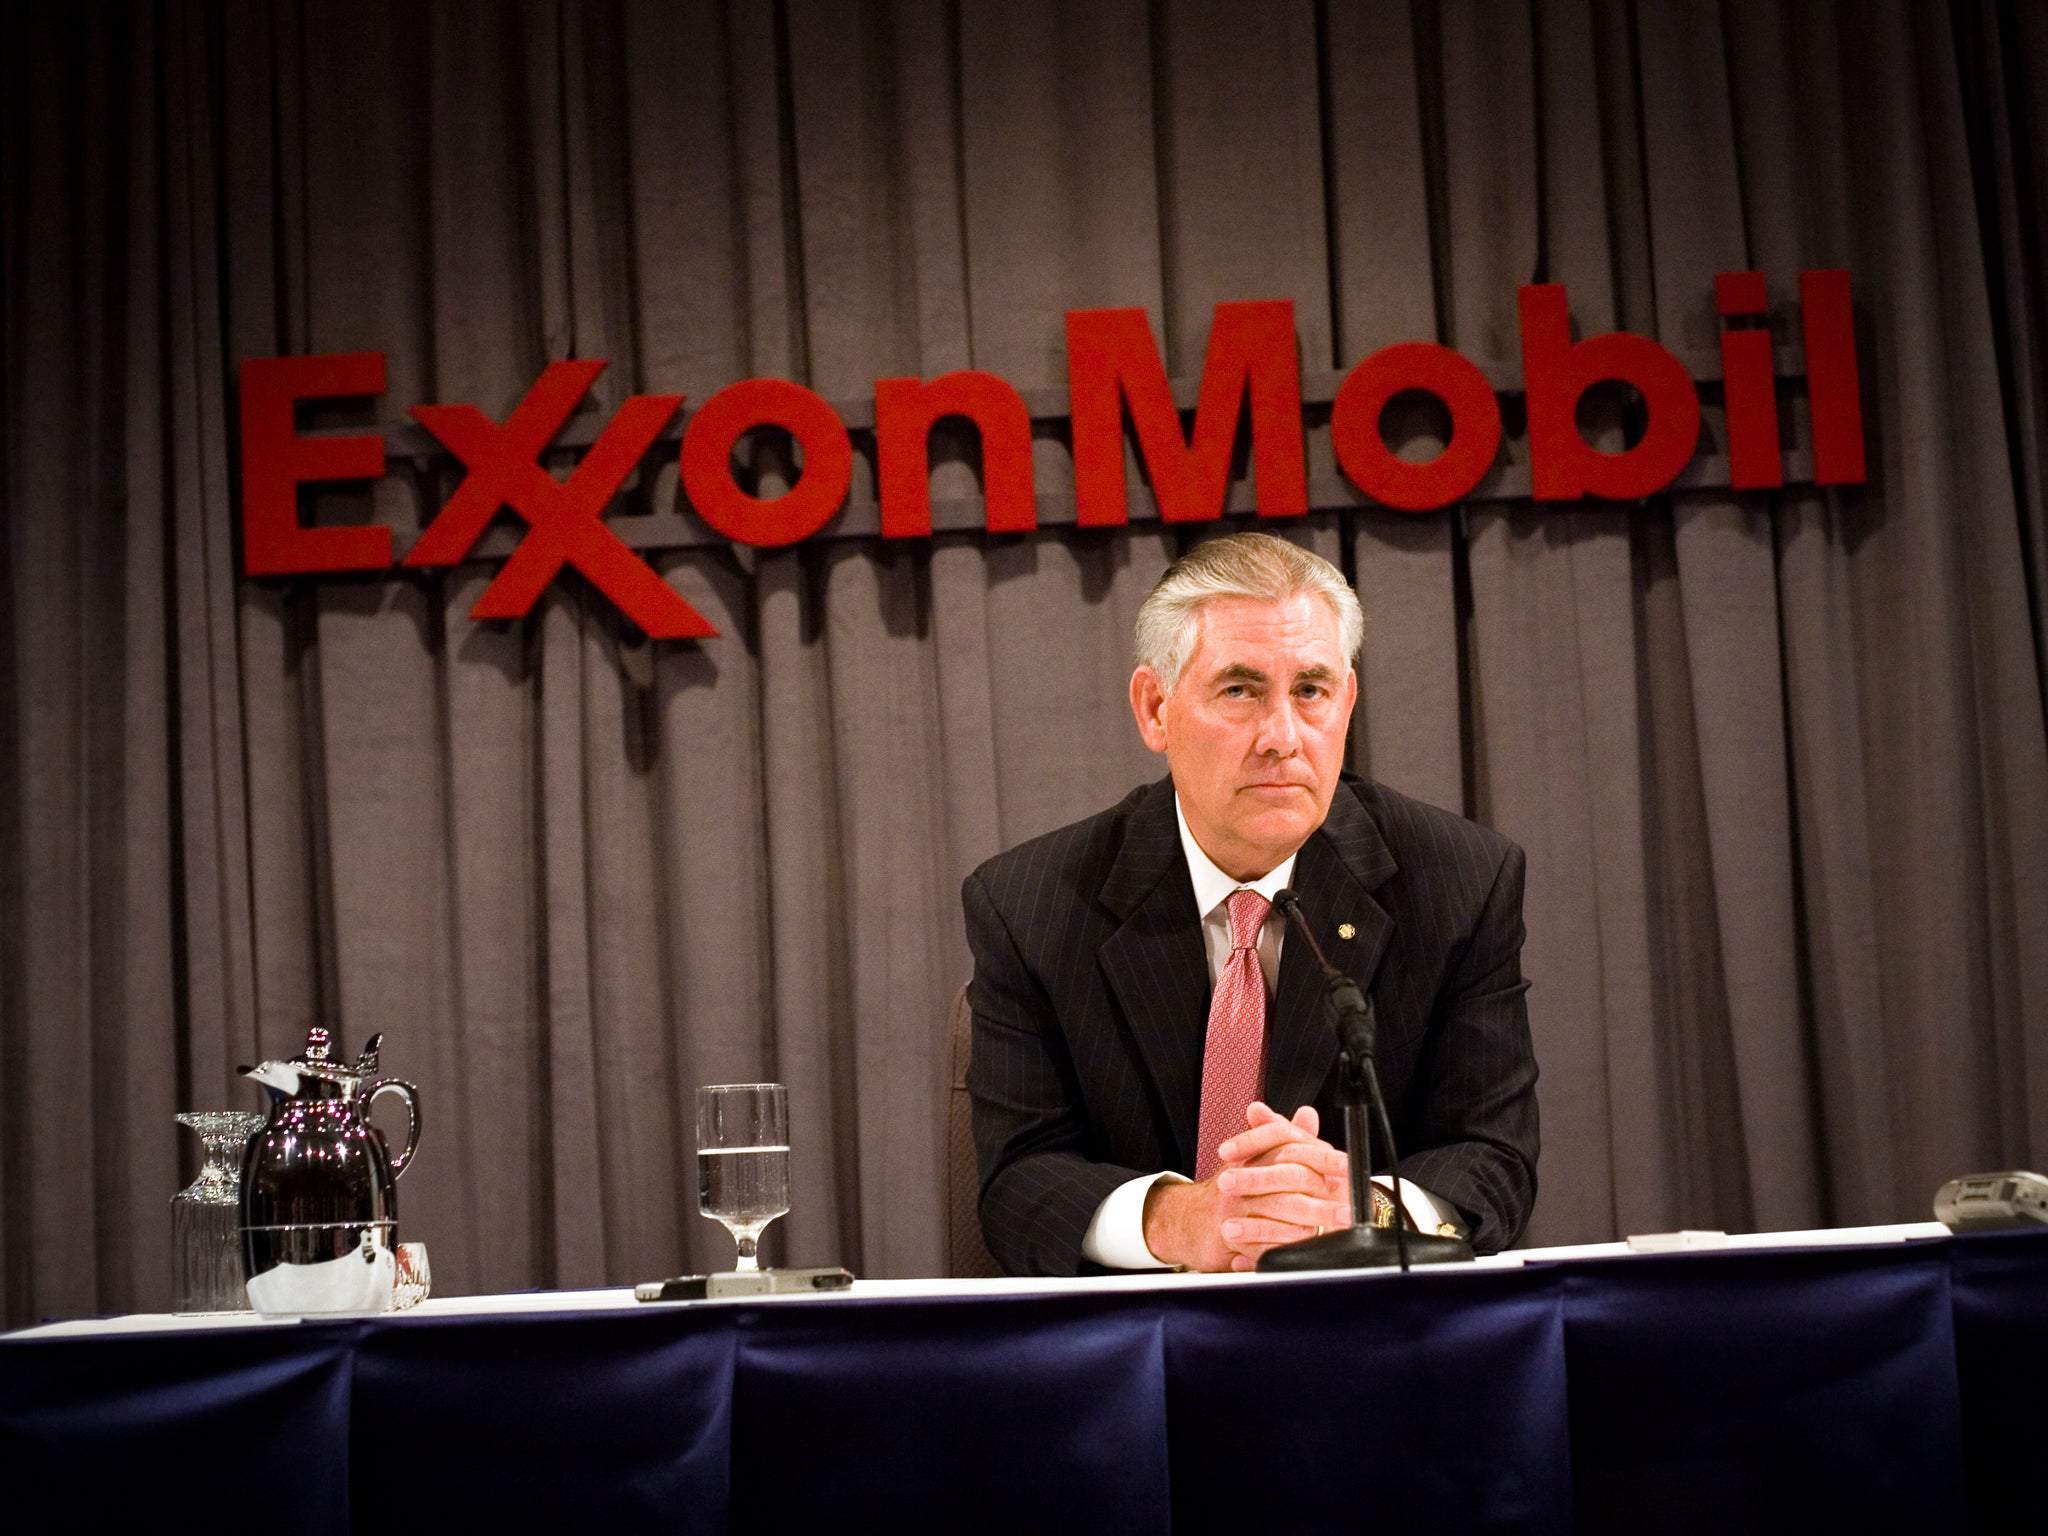 Rex Tillerson has ample experience dealing with other nations as head of ExxonMobil, but he has worked strictly as a businessman, not a diplomat